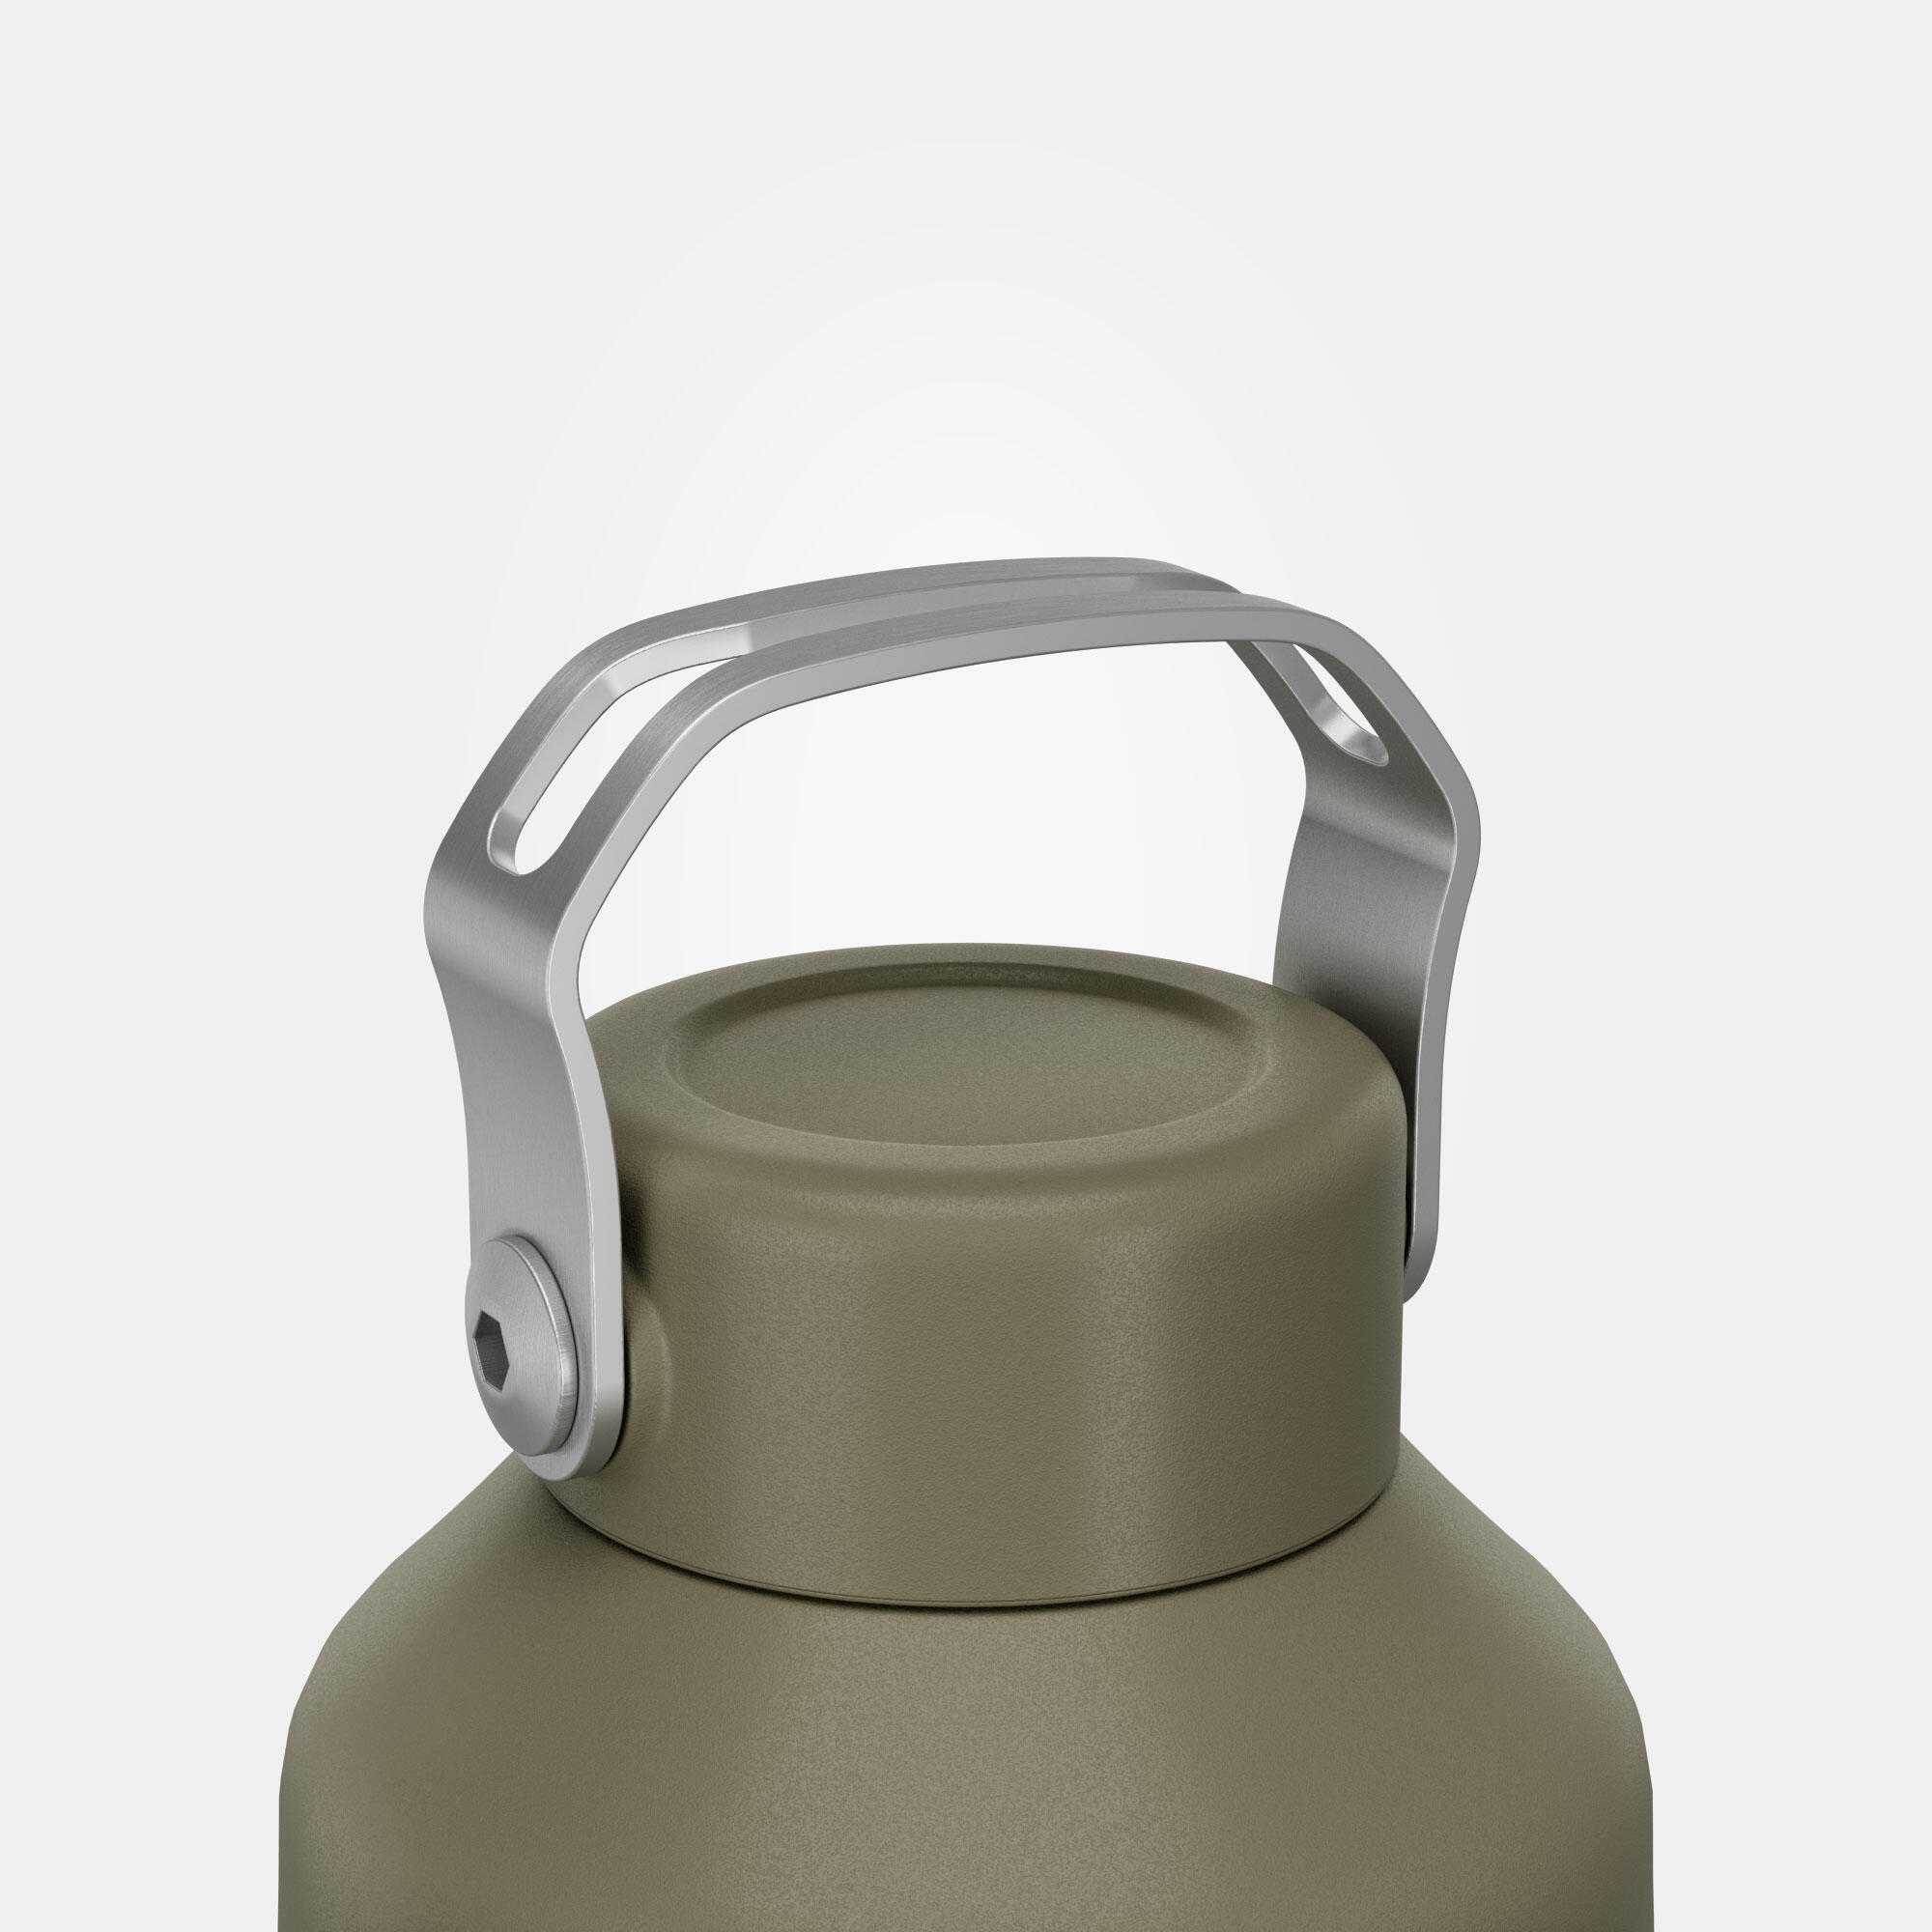 MH 100 Stainless Steel Bottle 1.5 L - QUECHUA